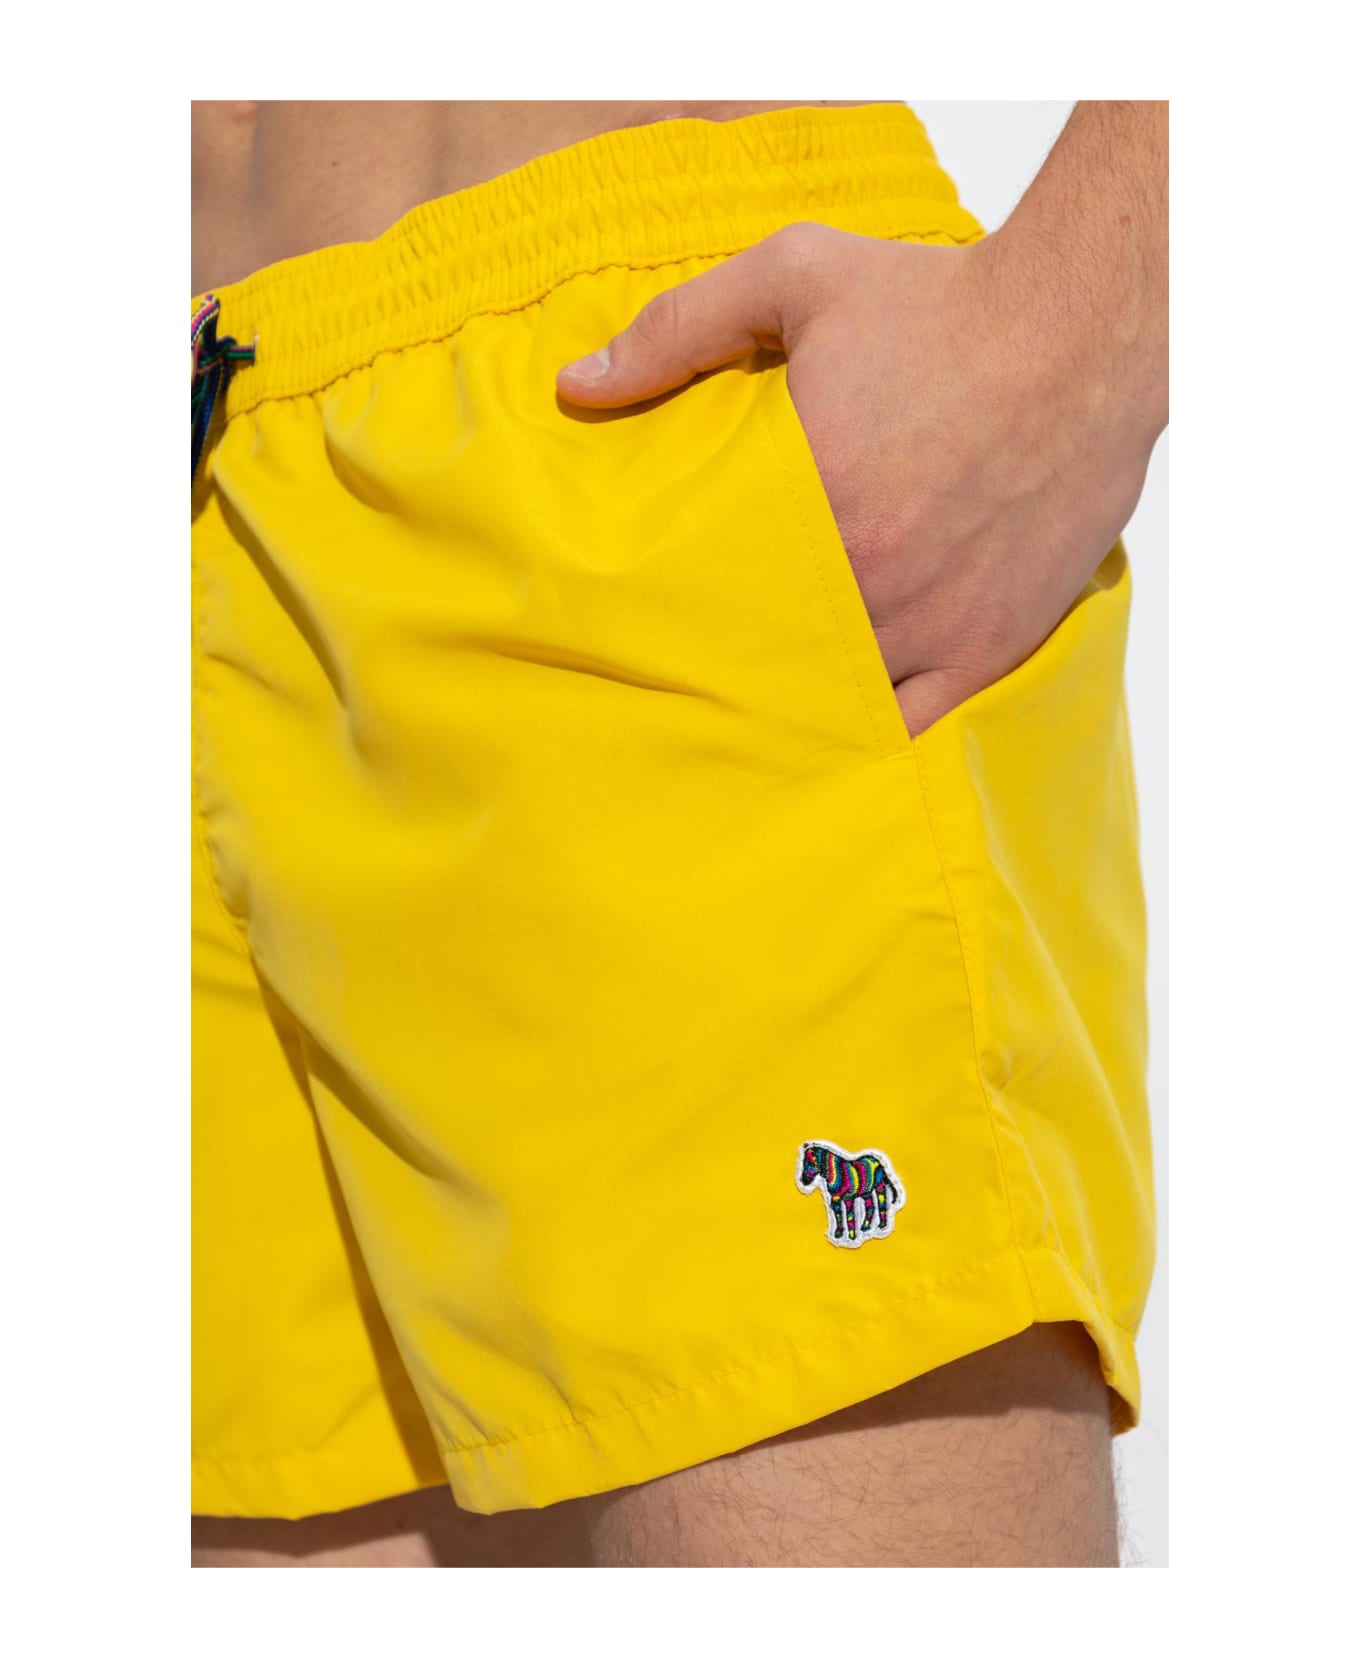 Paul Smith Swimming Shorts With Patch - Yellow スイムトランクス